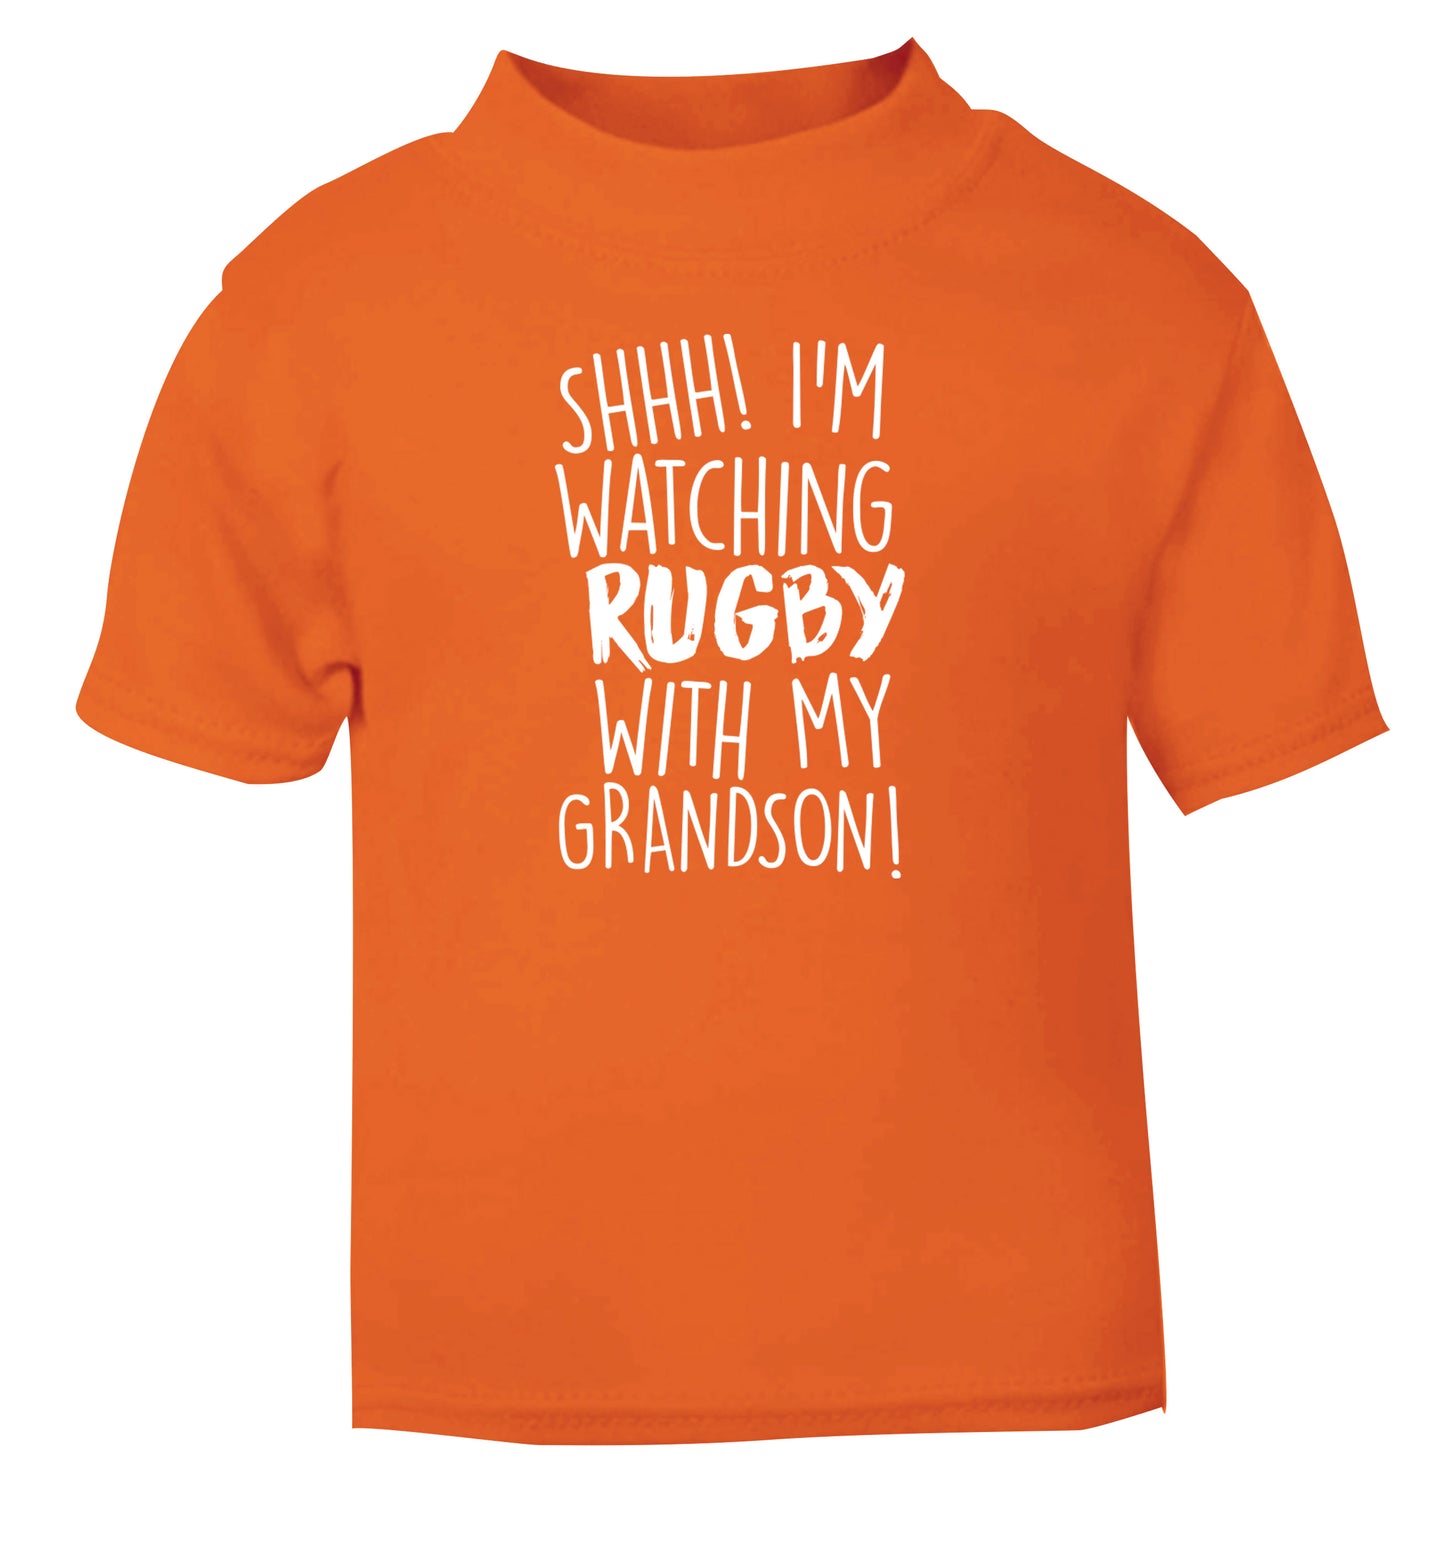 Shh I'm watching rugby with my grandson orange Baby Toddler Tshirt 2 Years